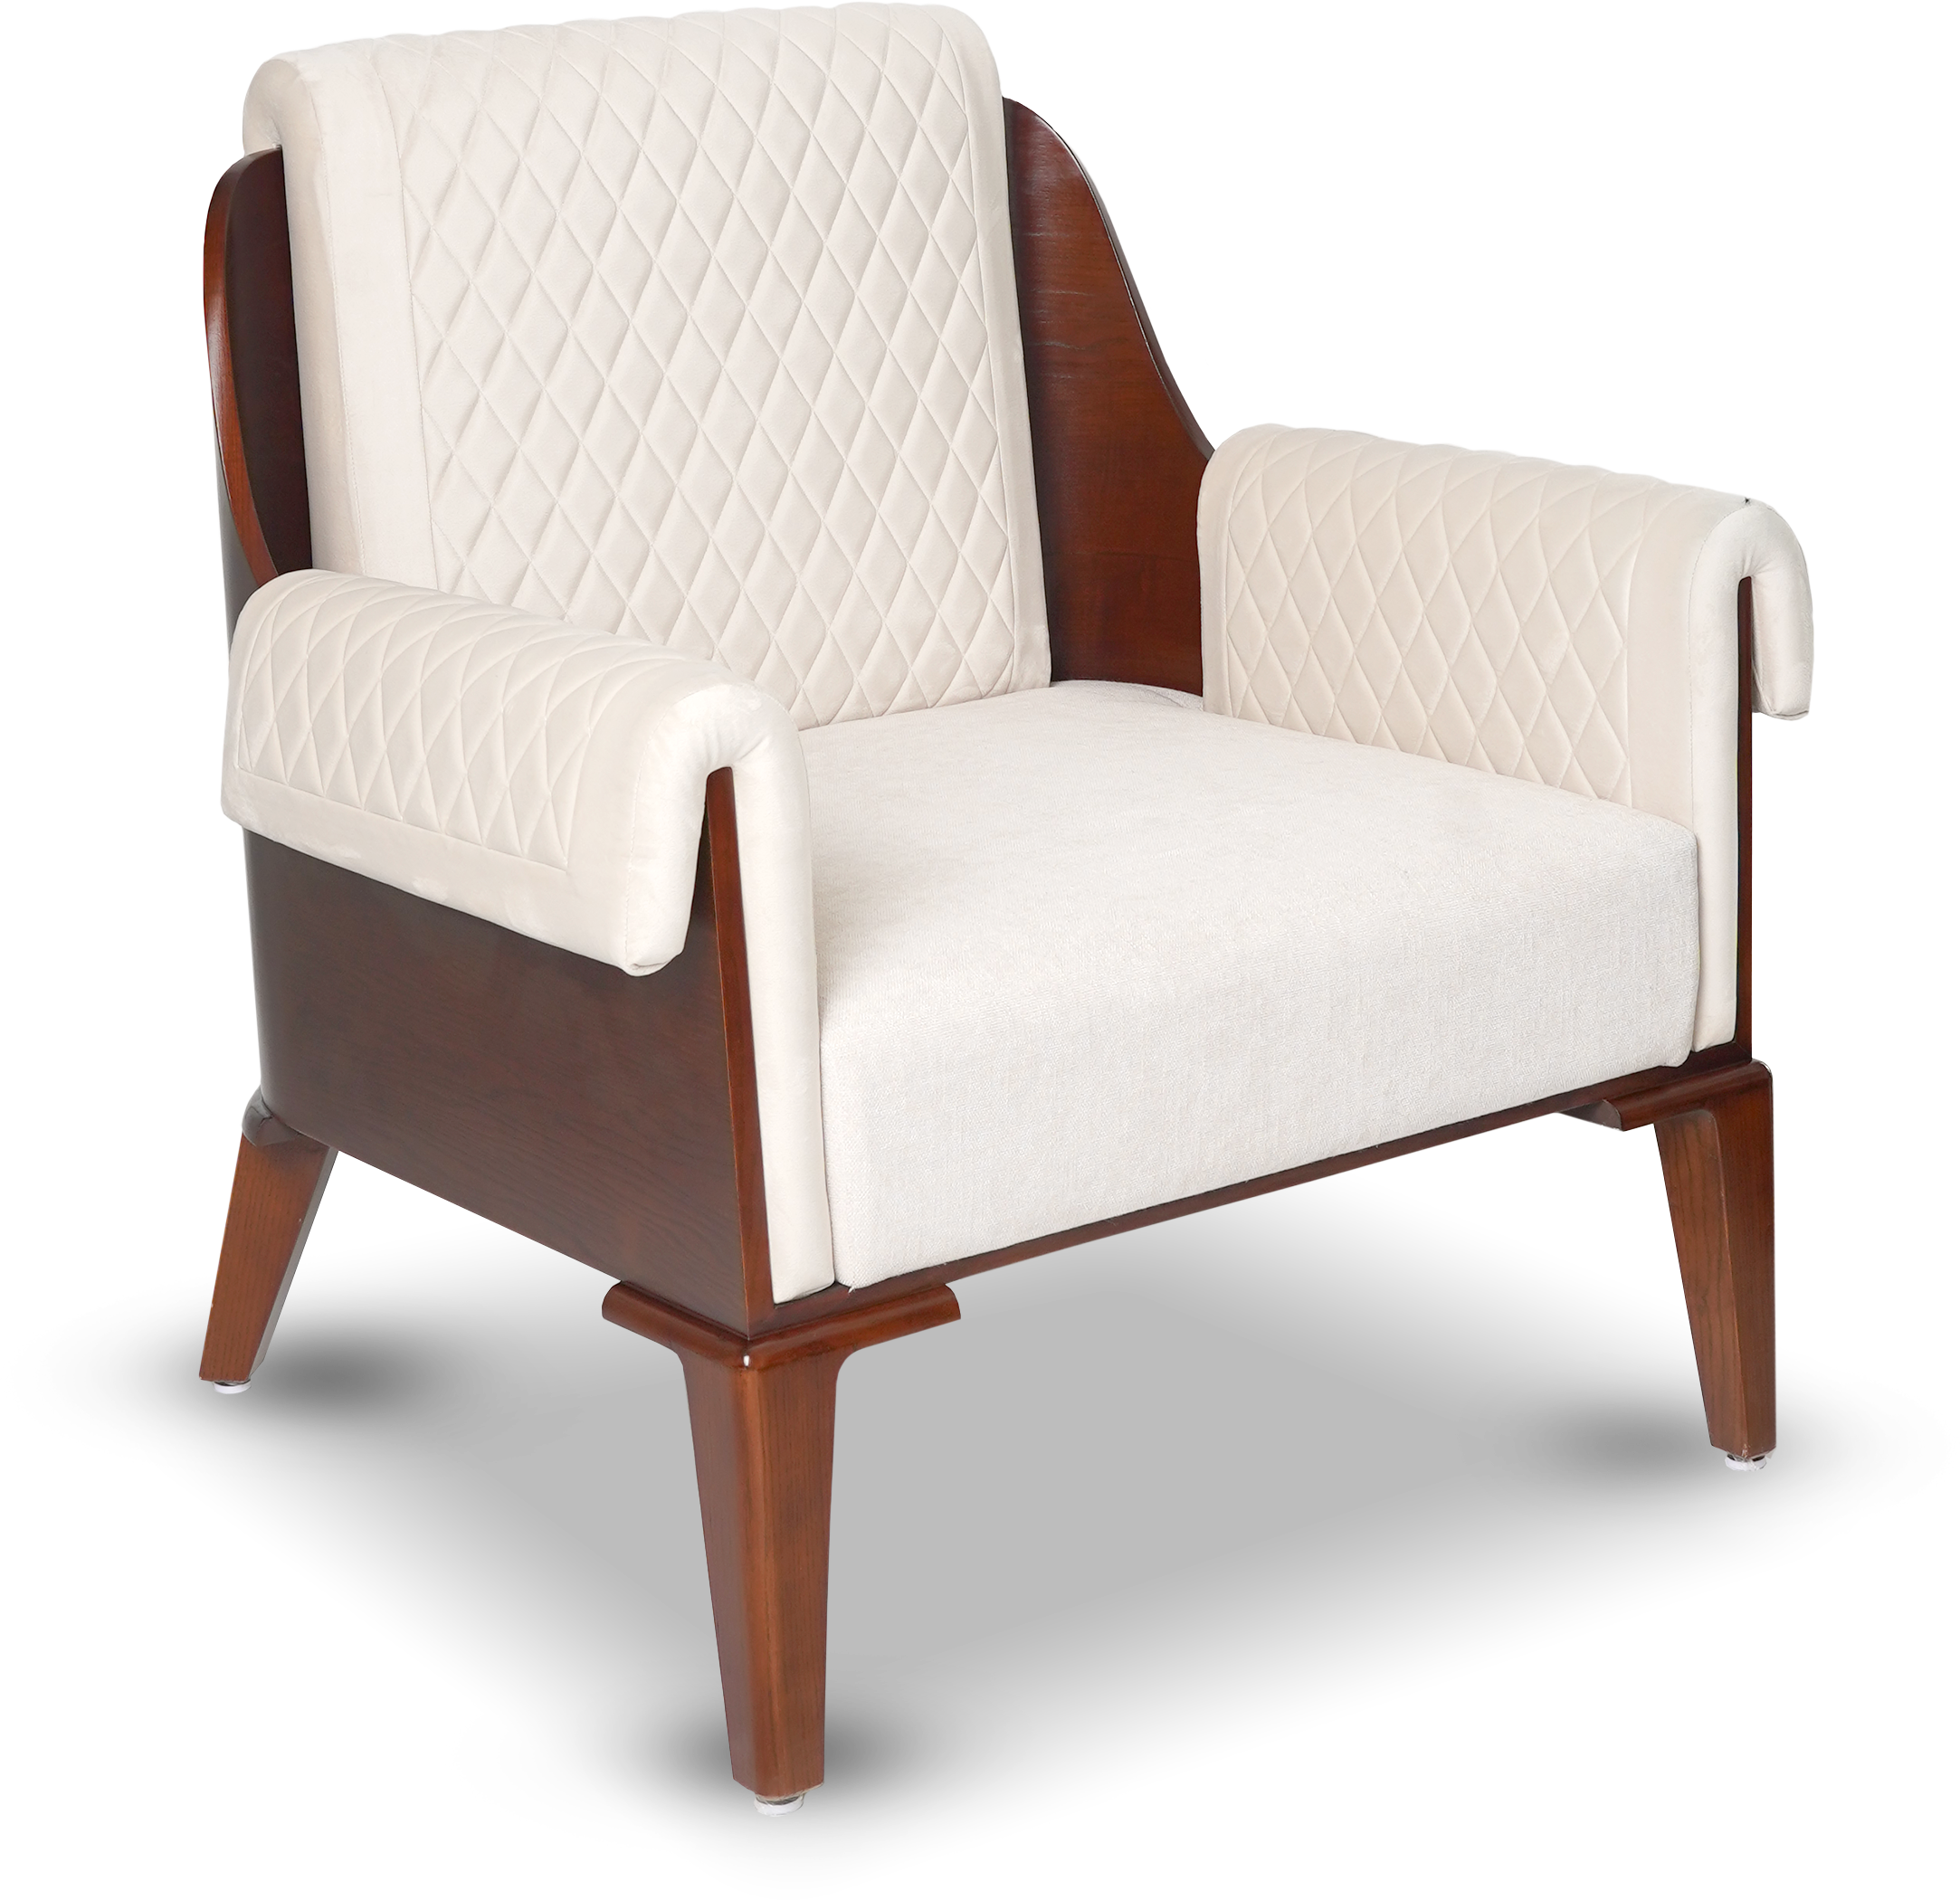 THE PROVENCE CHAIR